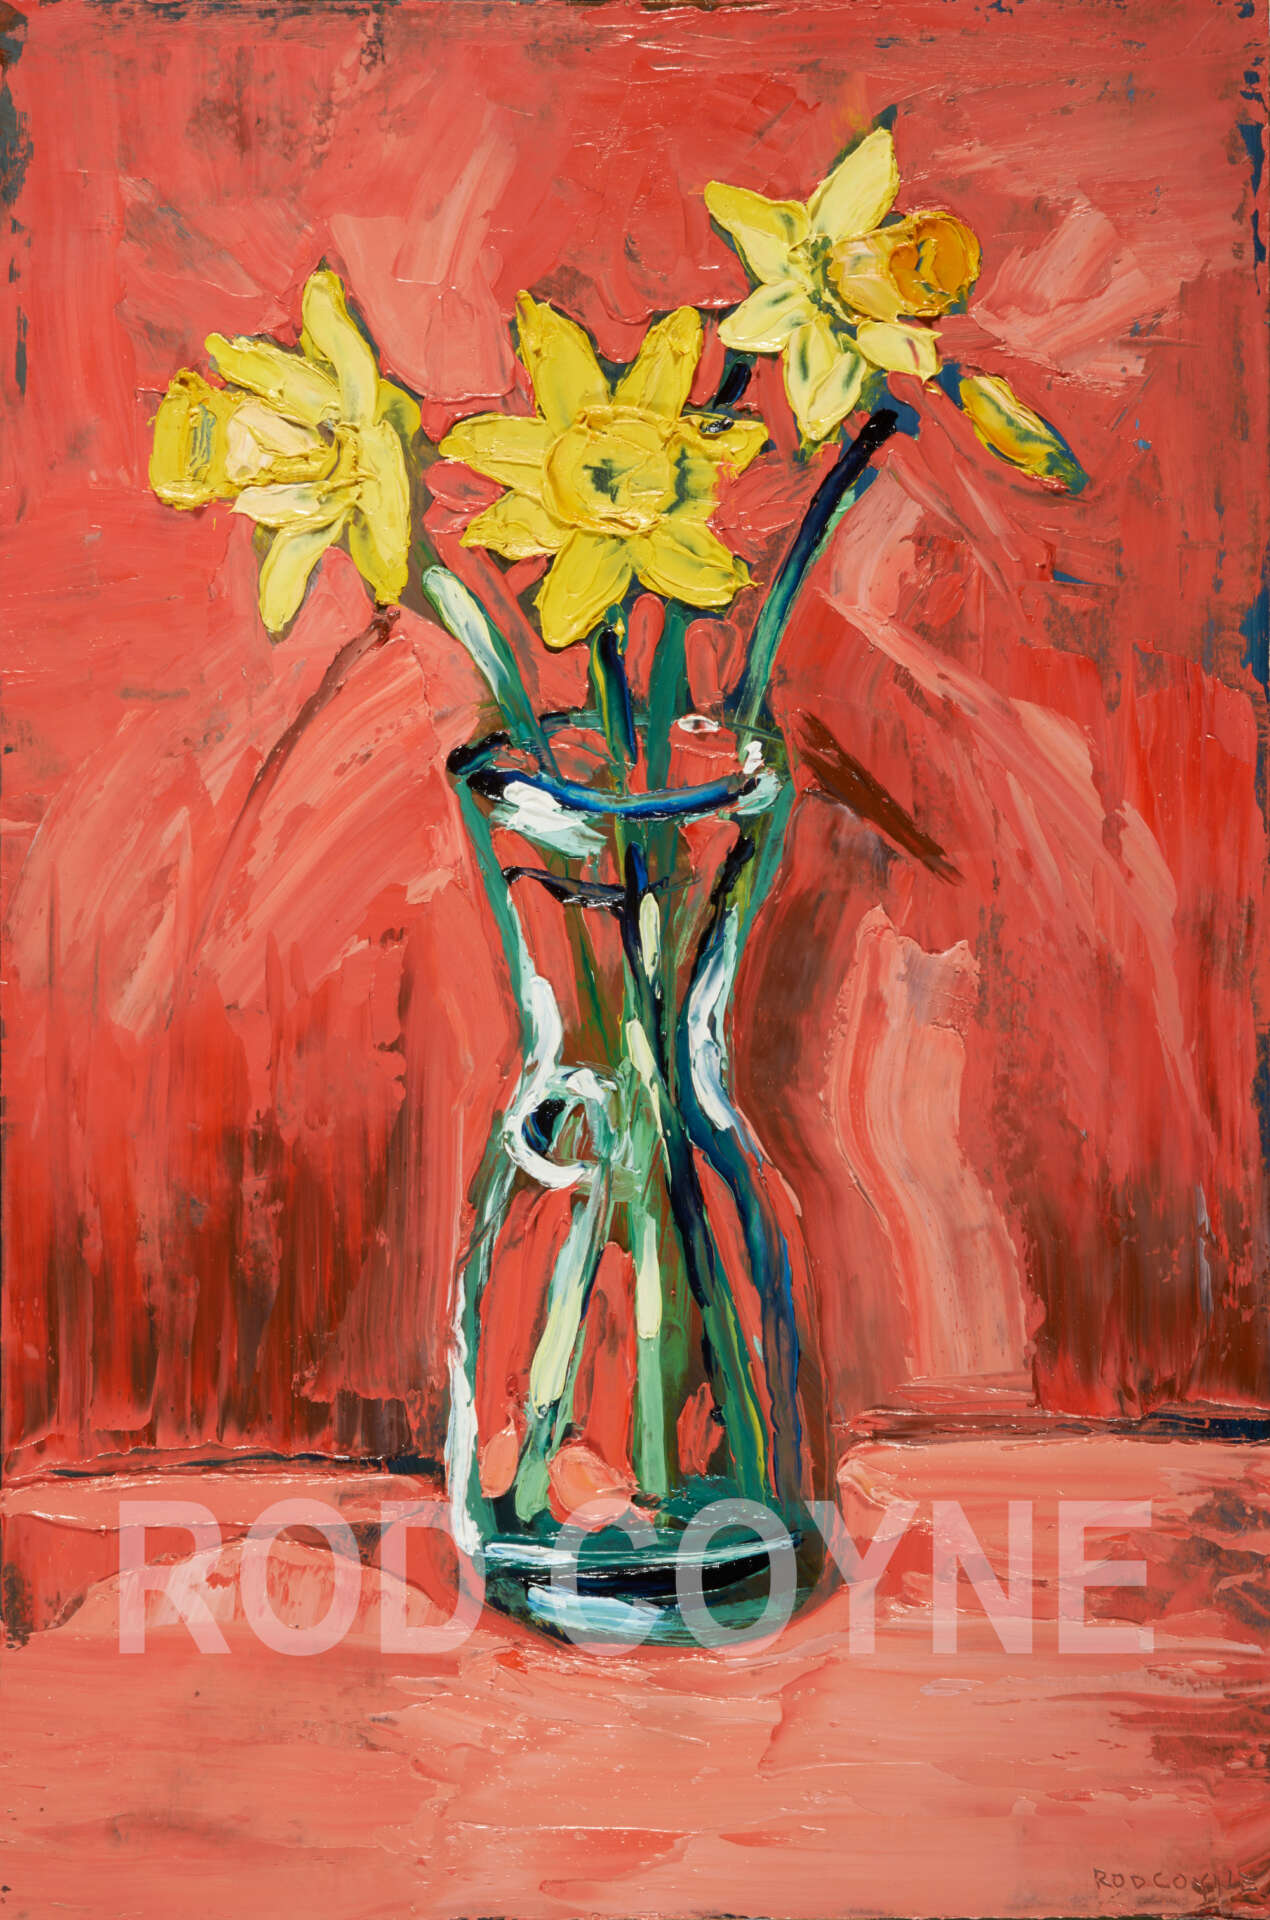 artist rod coyne's still life painting "daffodils" is shown here, high definition and watermarked.